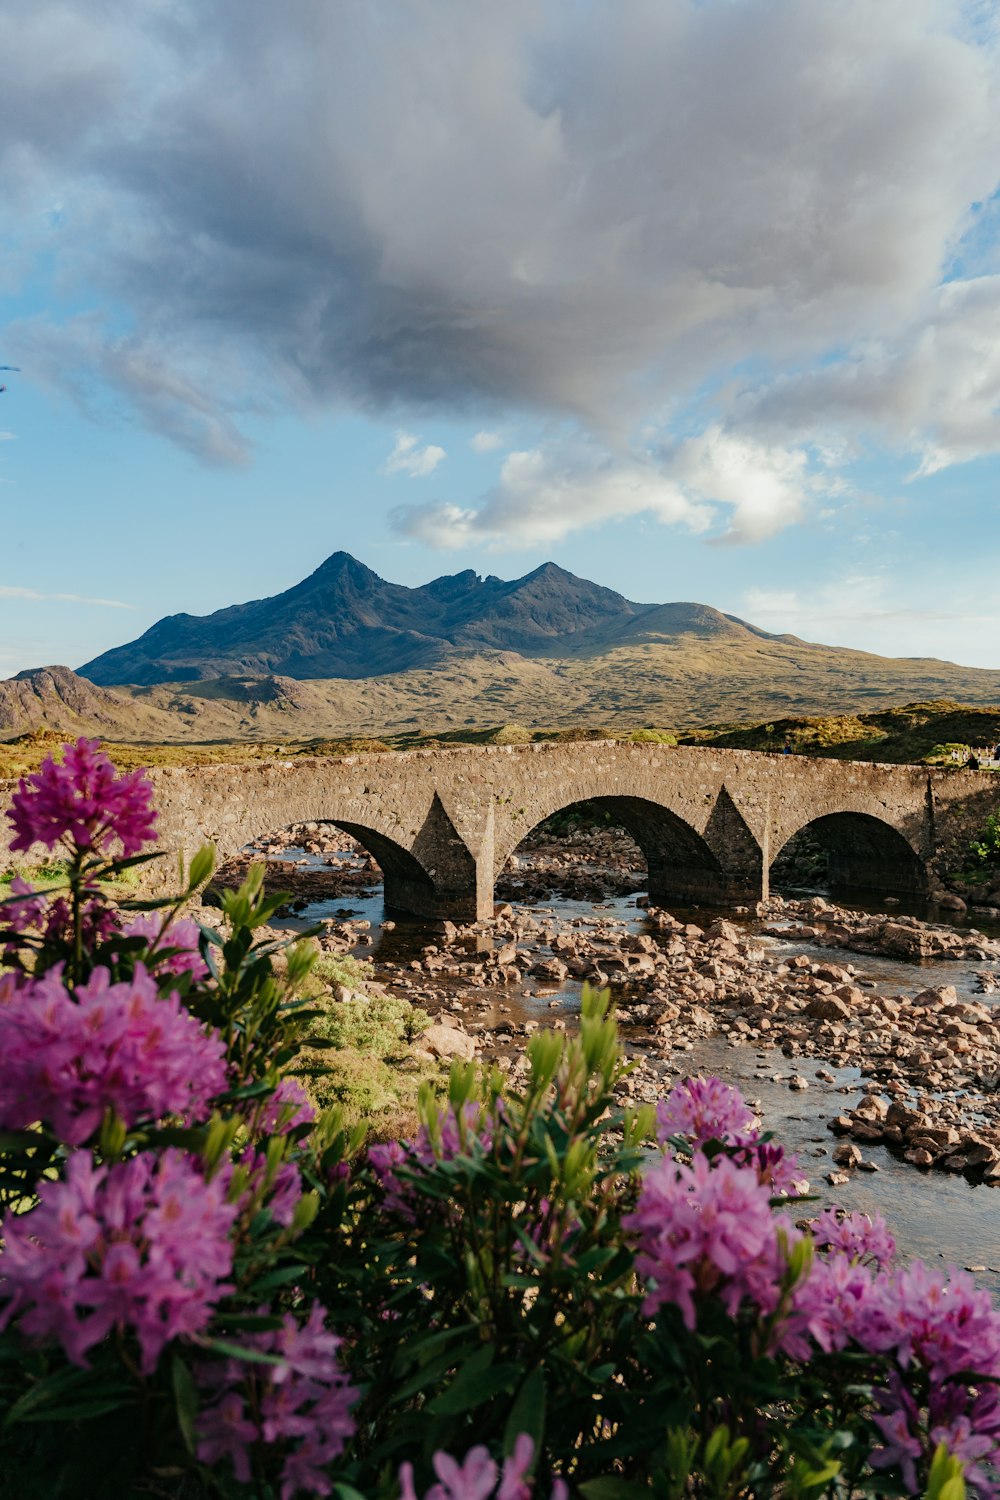 a stone bridge over a river surrounded by purple flowers